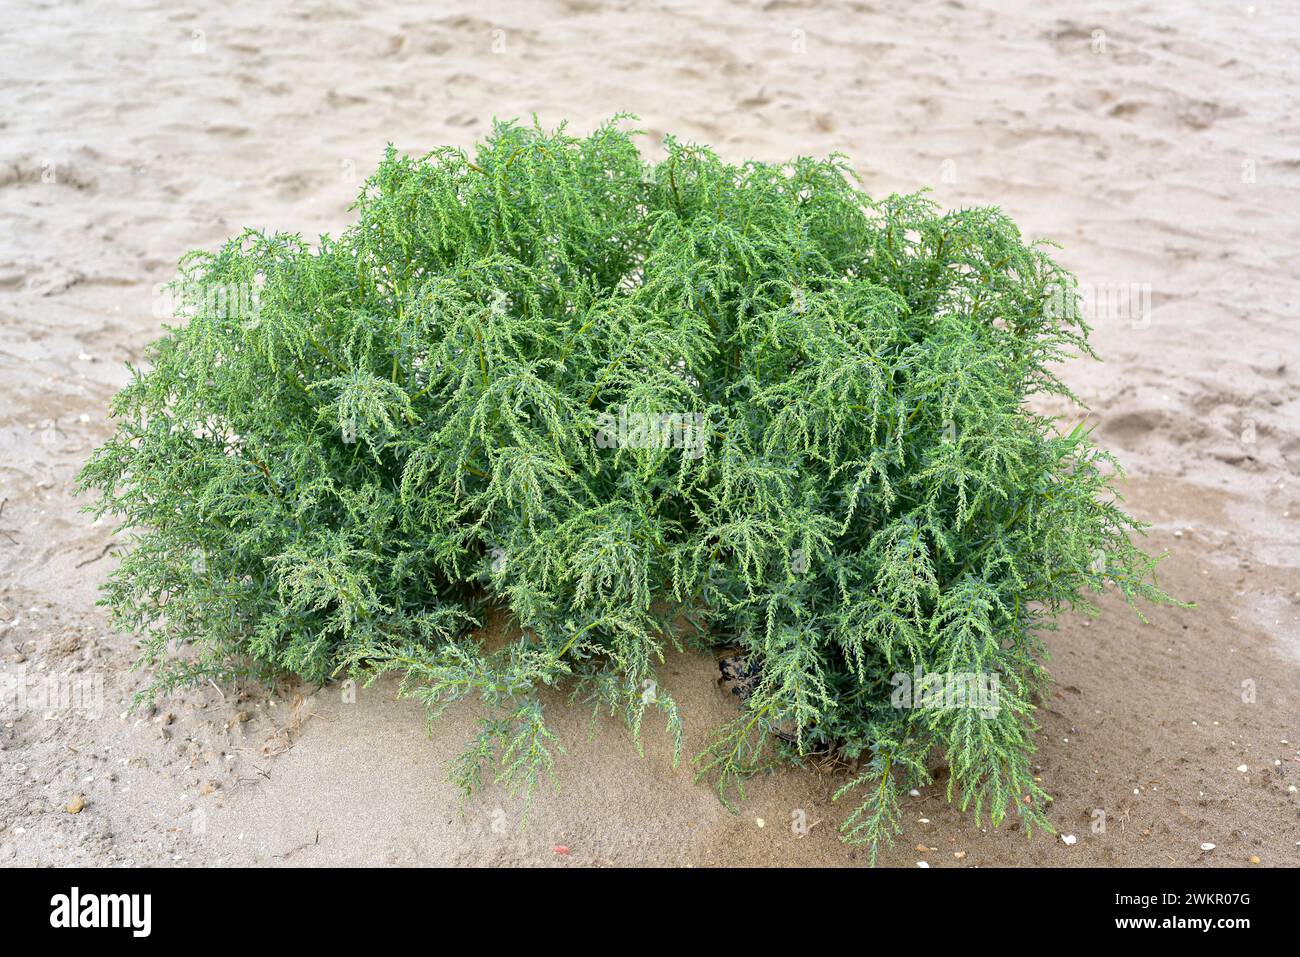 Annual seablite (Suaeda maritima) is an halophyte succulent shrub native to European and norther Africa coasts and salt marshes. This photo was taken Stock Photo